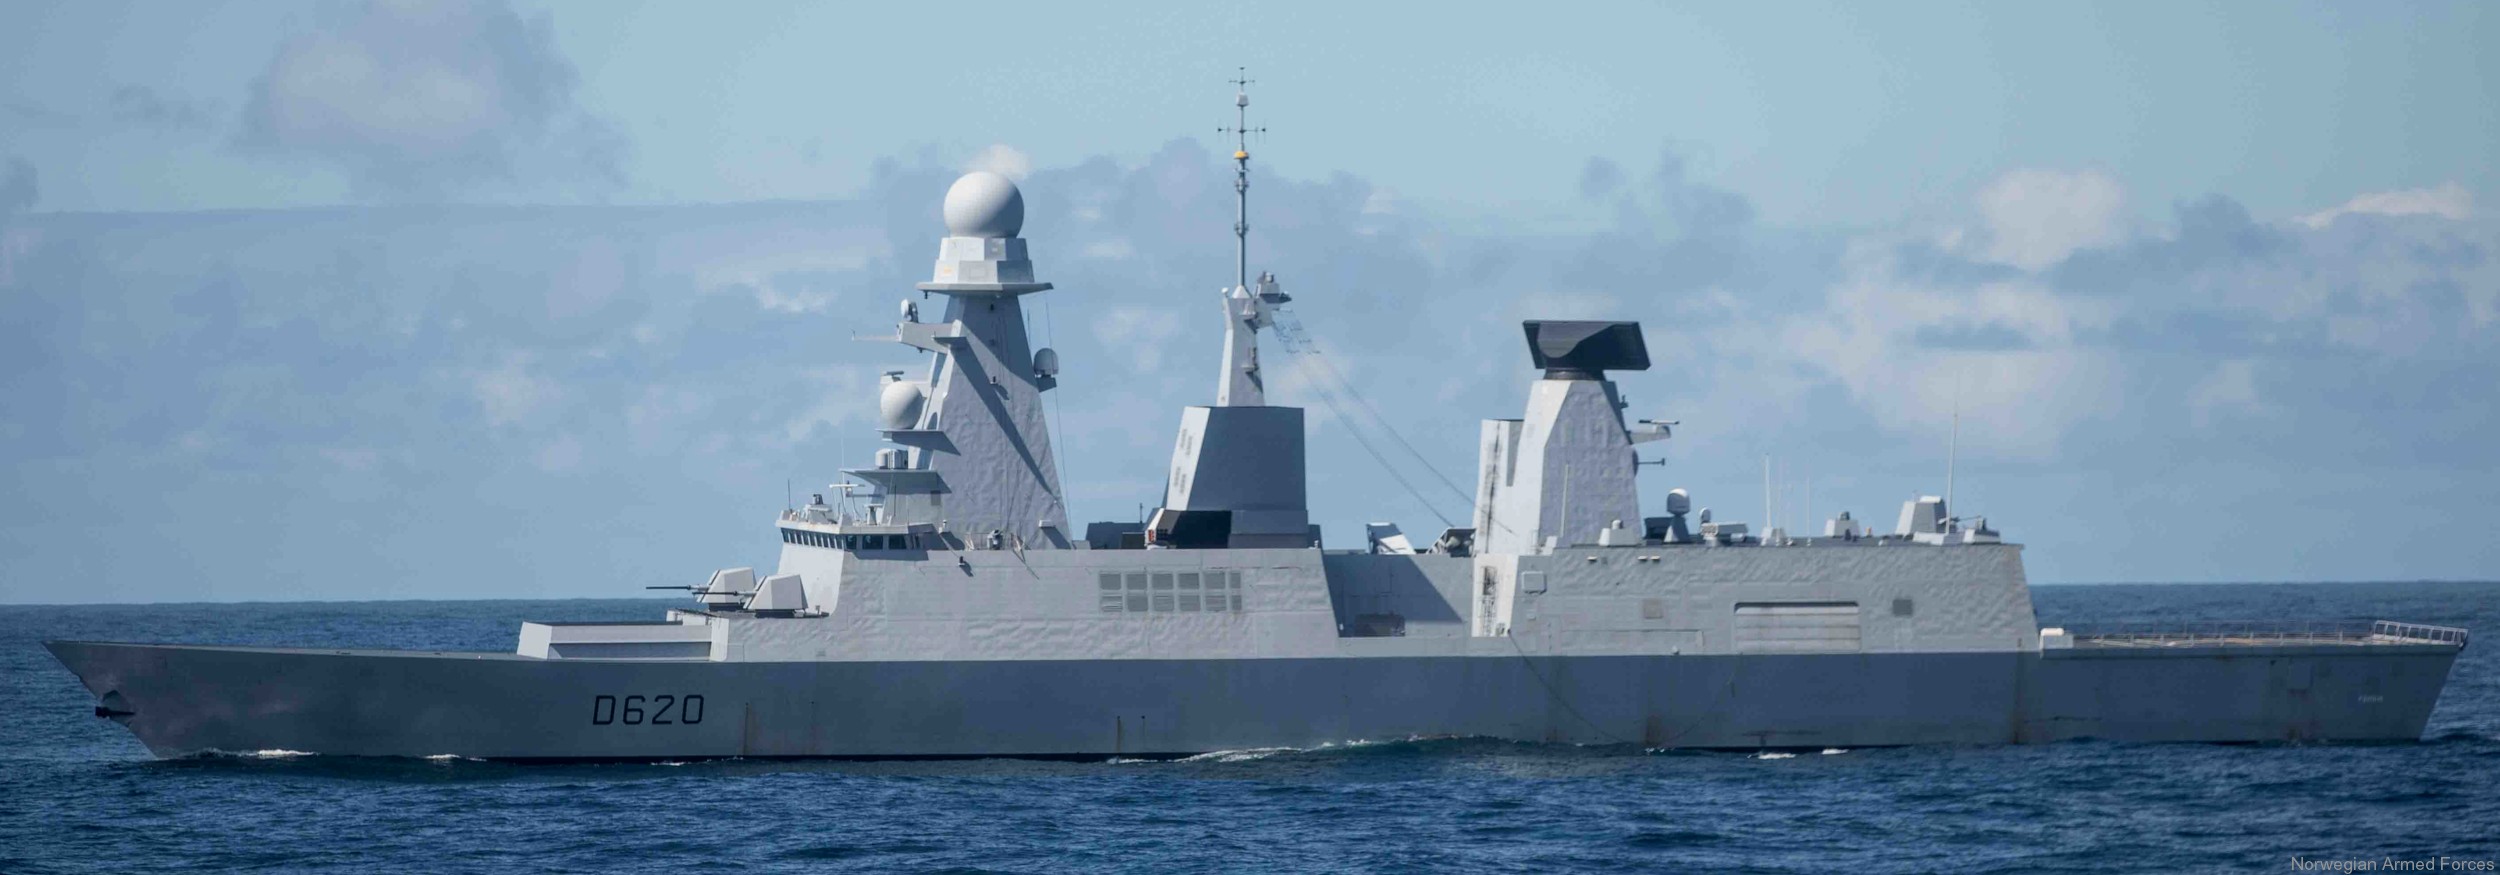 d-620 fs forbin horizon class guided missile frigate fregate anti-air-warfare aaw french navy marine nationale 28